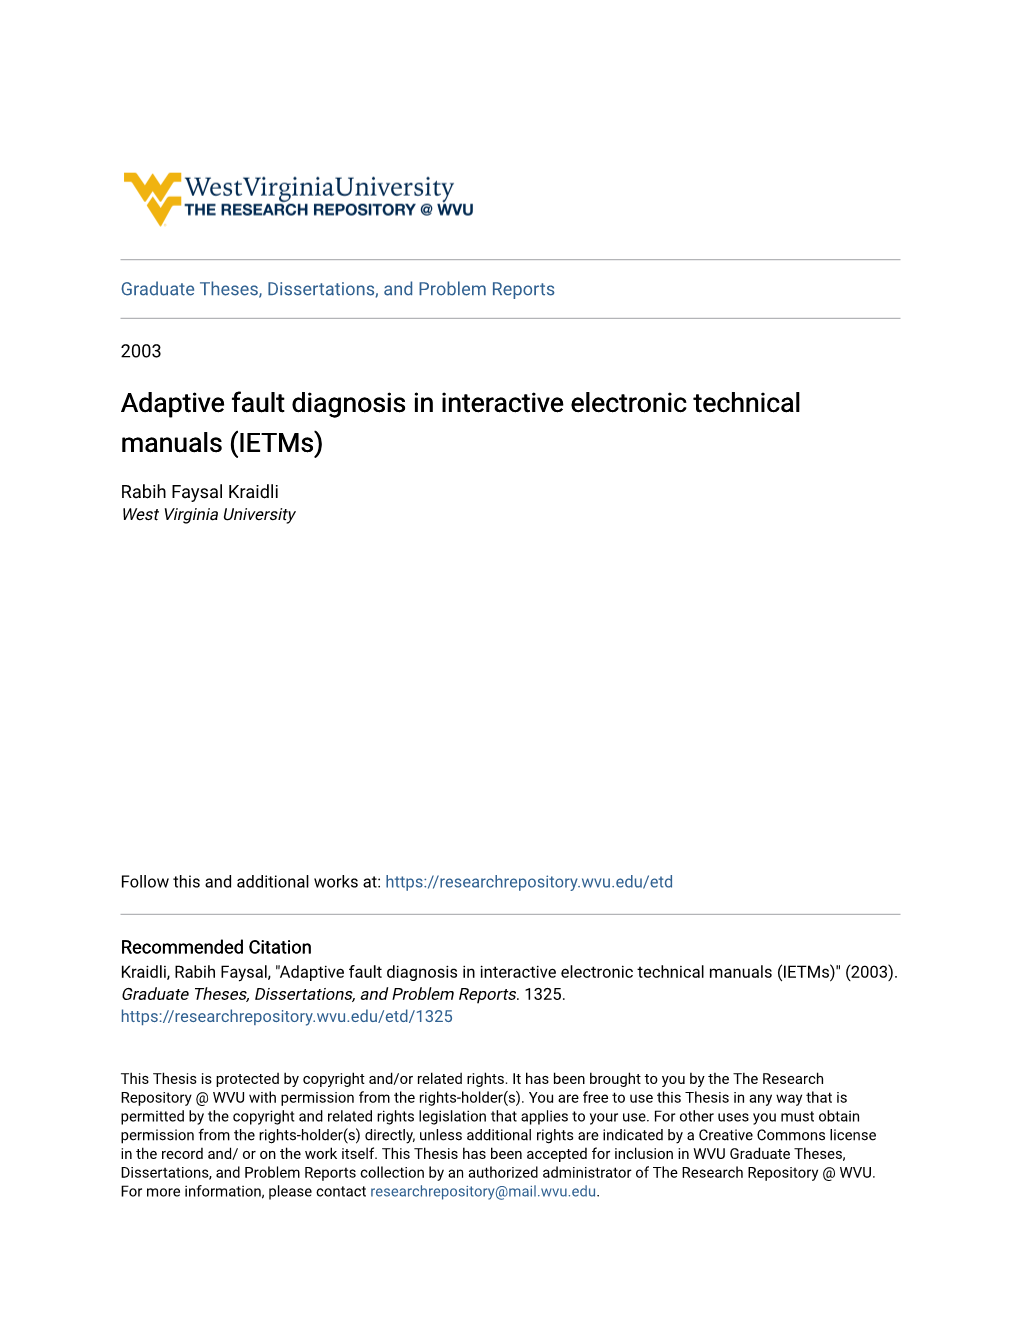 Adaptive Fault Diagnosis in Interactive Electronic Technical Manuals (Ietms)